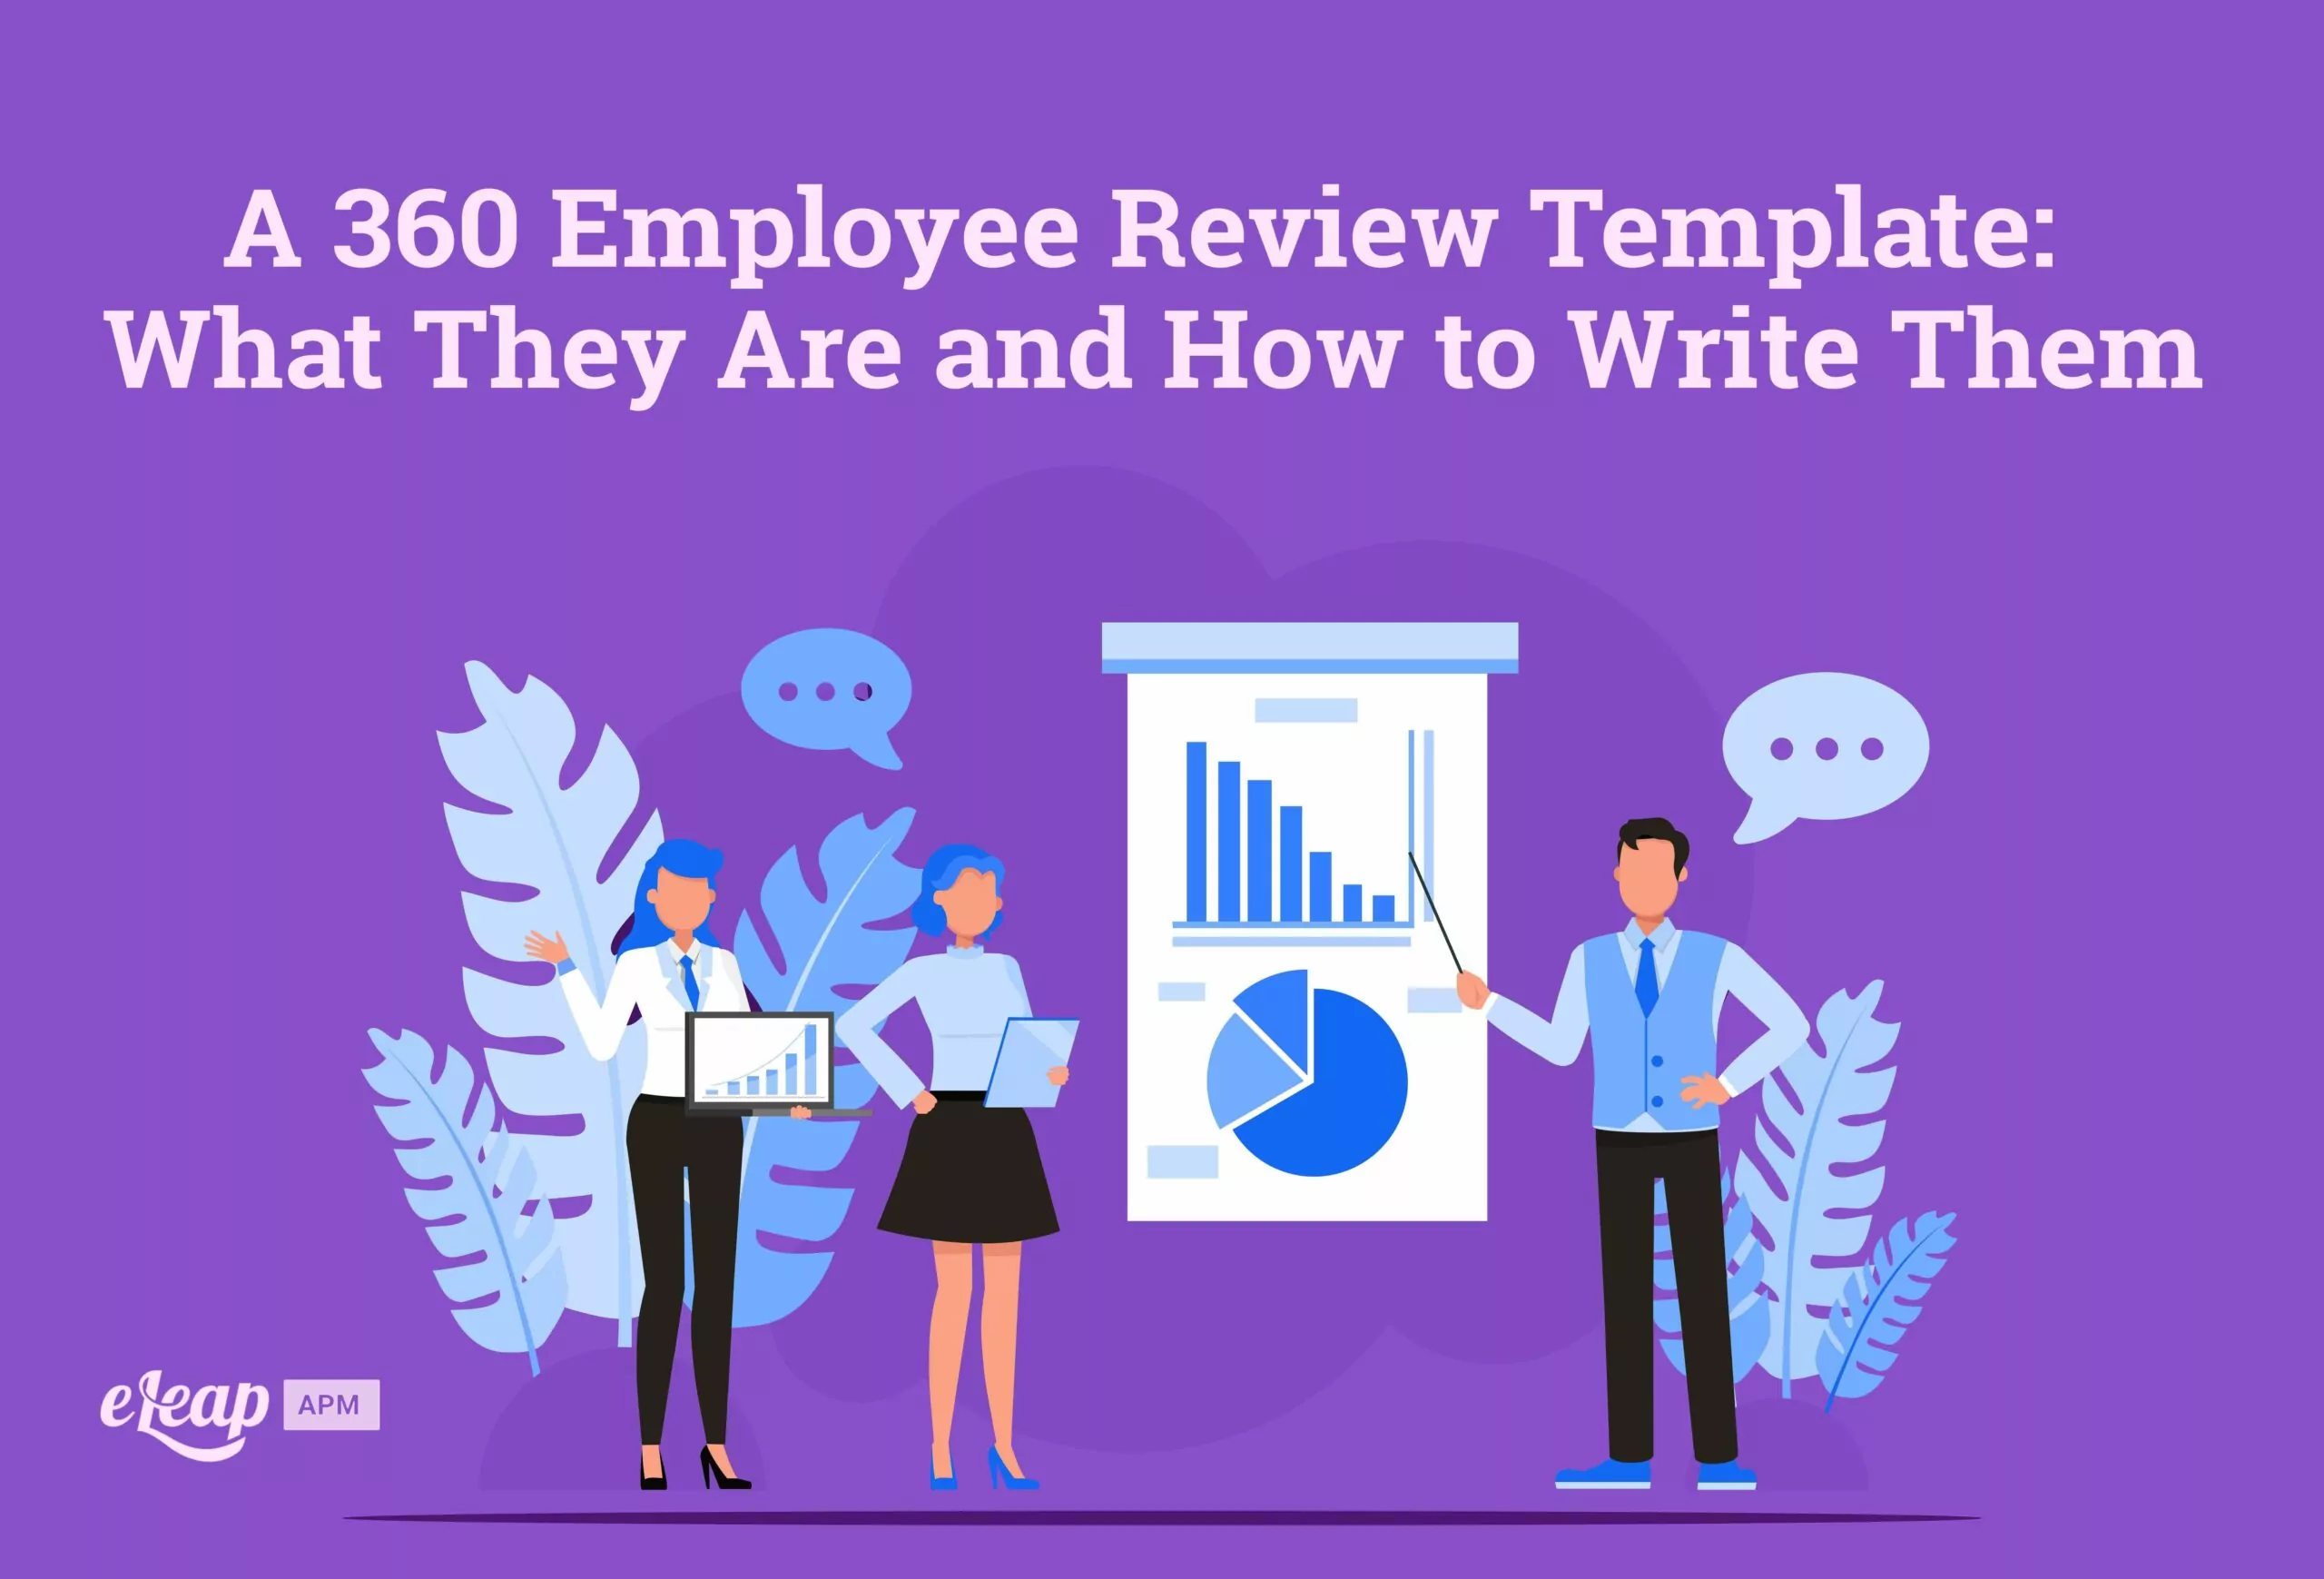 A 360 Employee Review Template: What They Are and How to Write Them